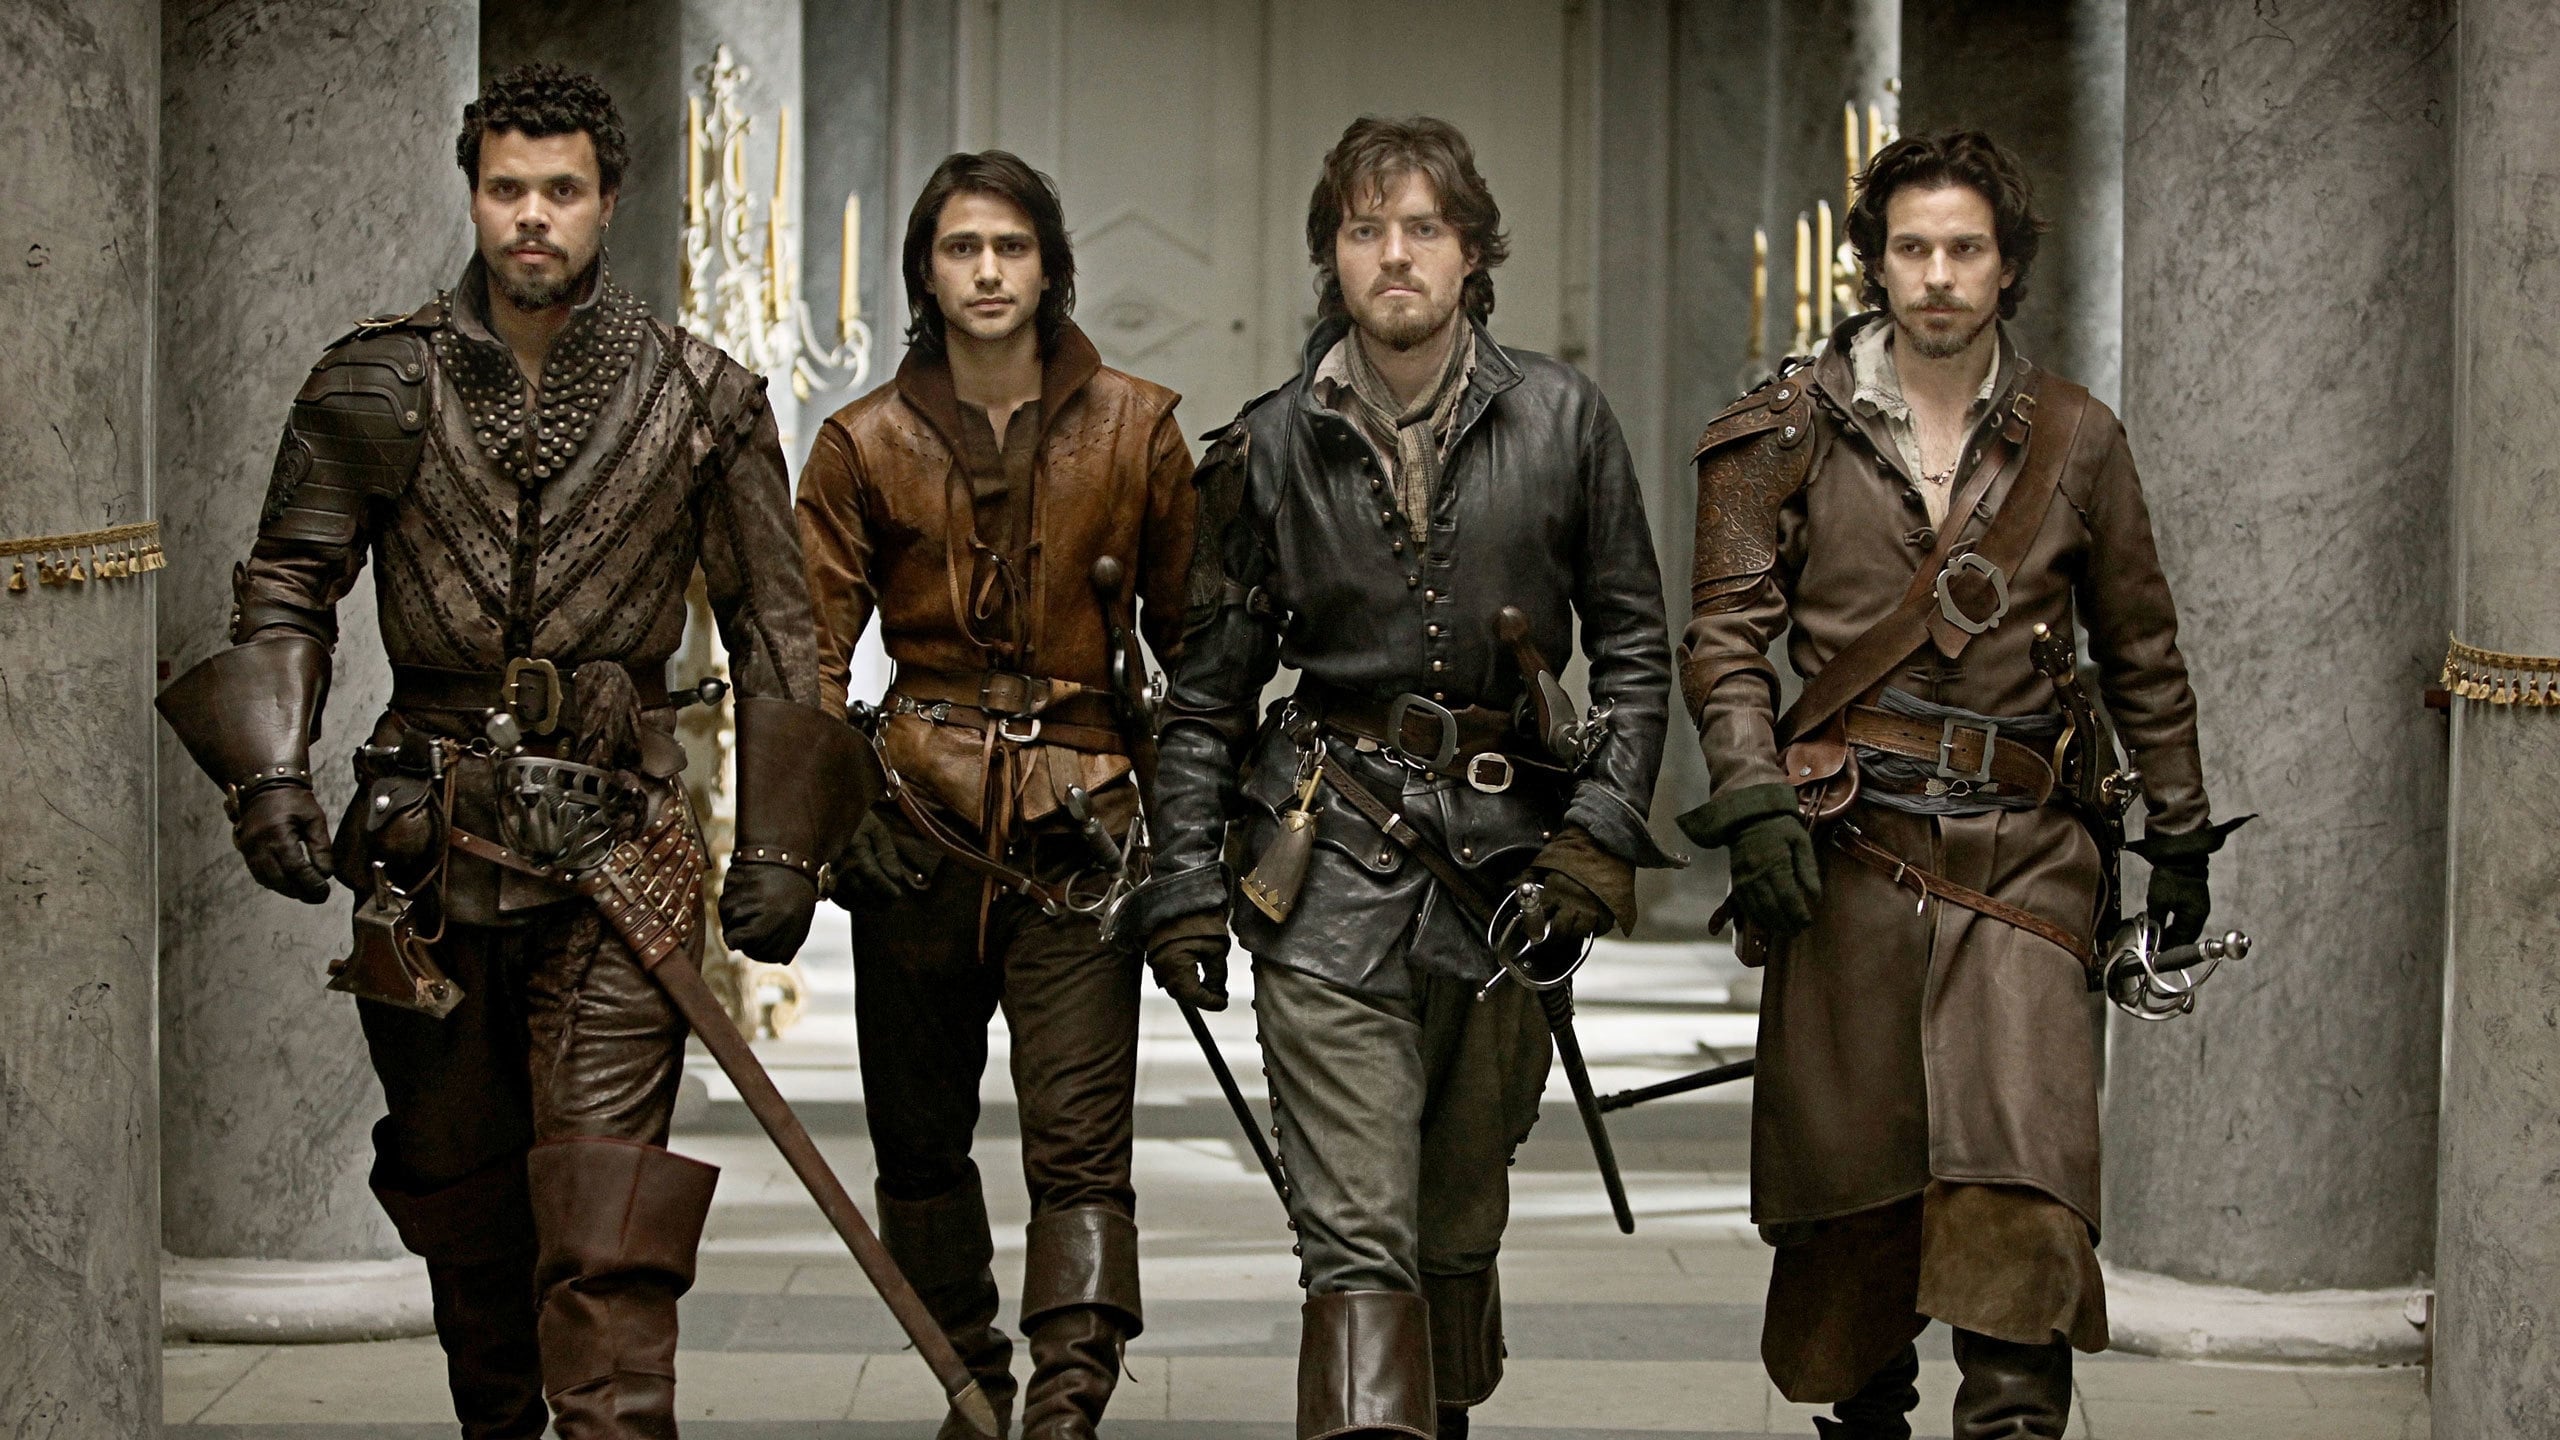 Watch The Musketeers Full TV Series Online in HD Quality - Set in 17th cent...